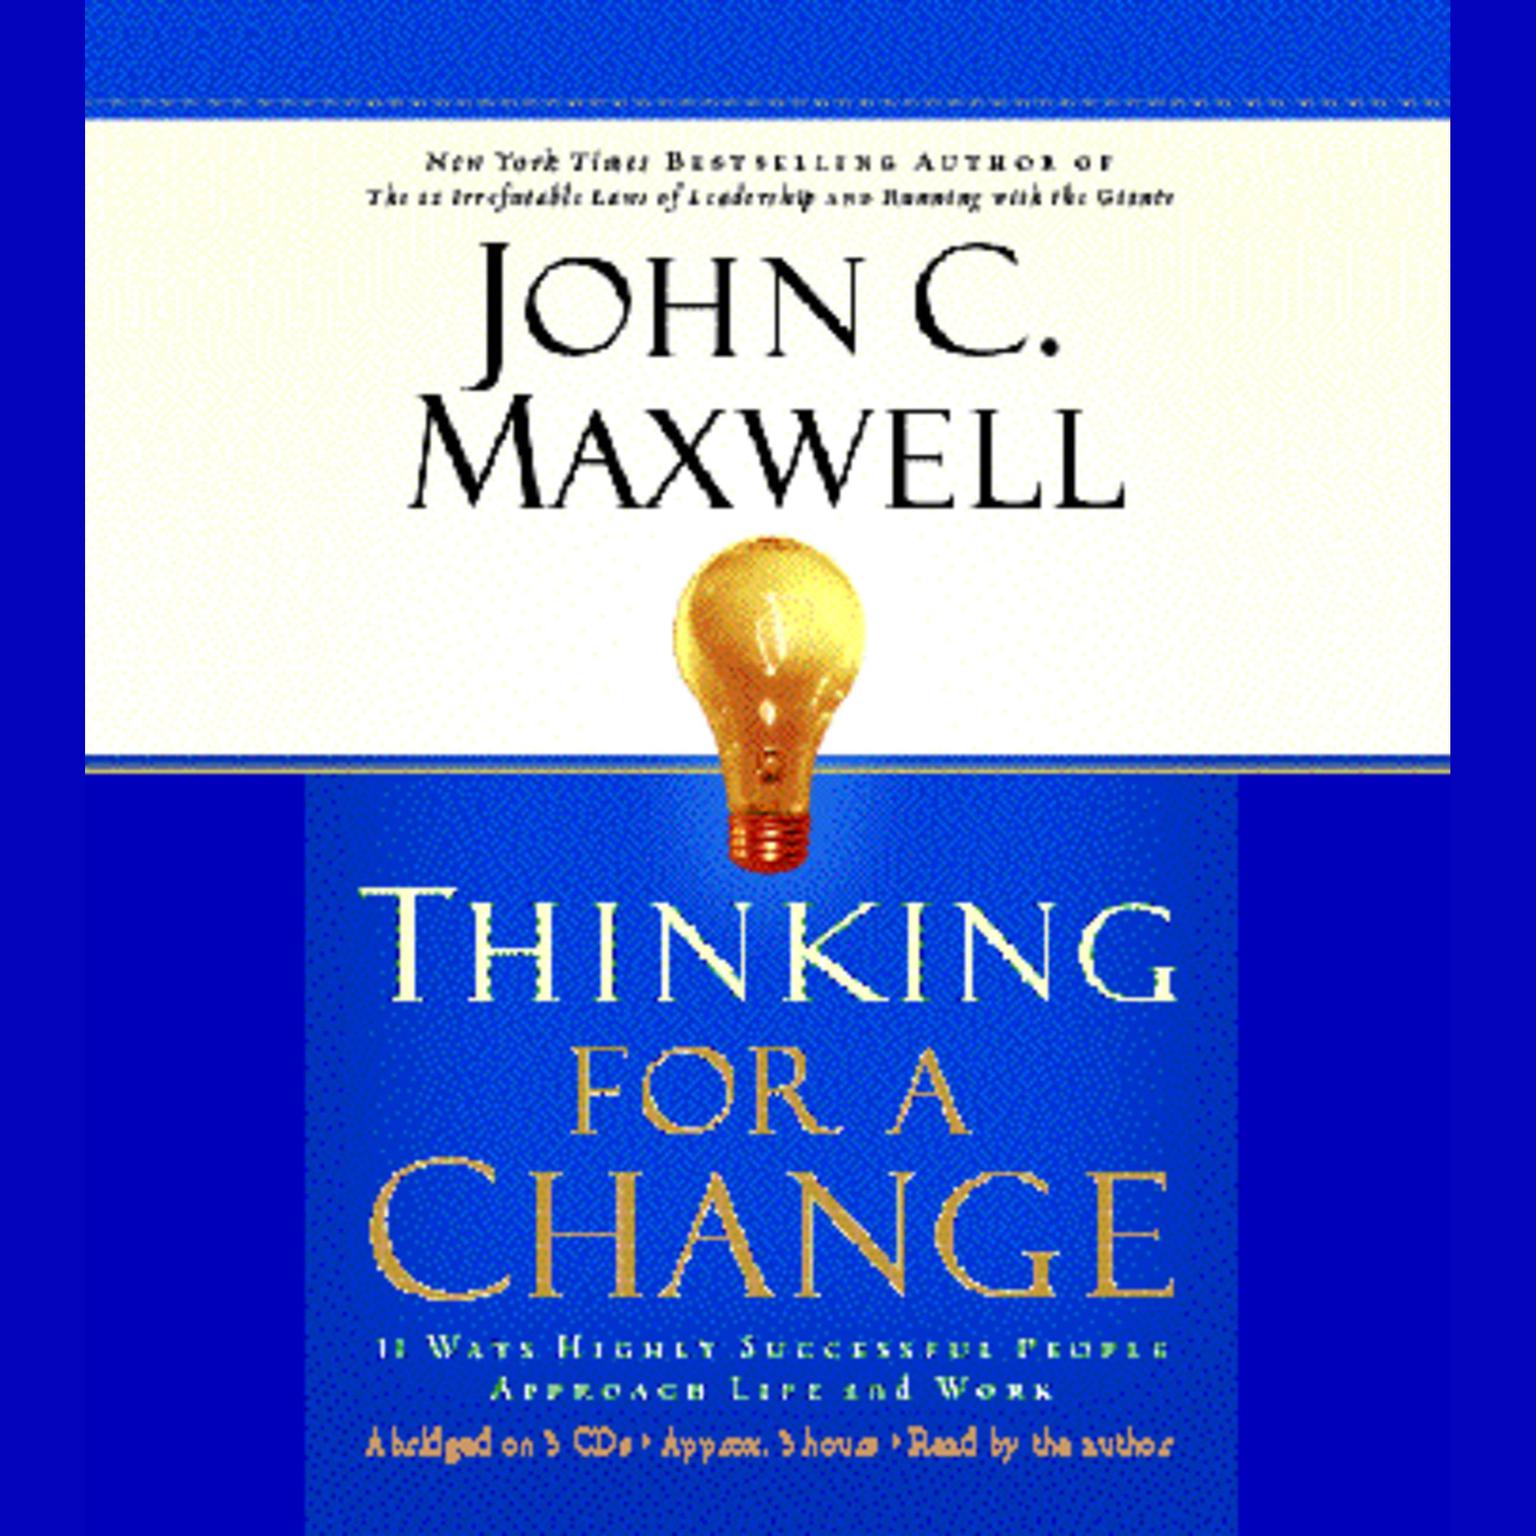 Thinking for a Change (Abridged): 11 Ways Highly Successful People Approach Life & Work Audiobook, by John C. Maxwell